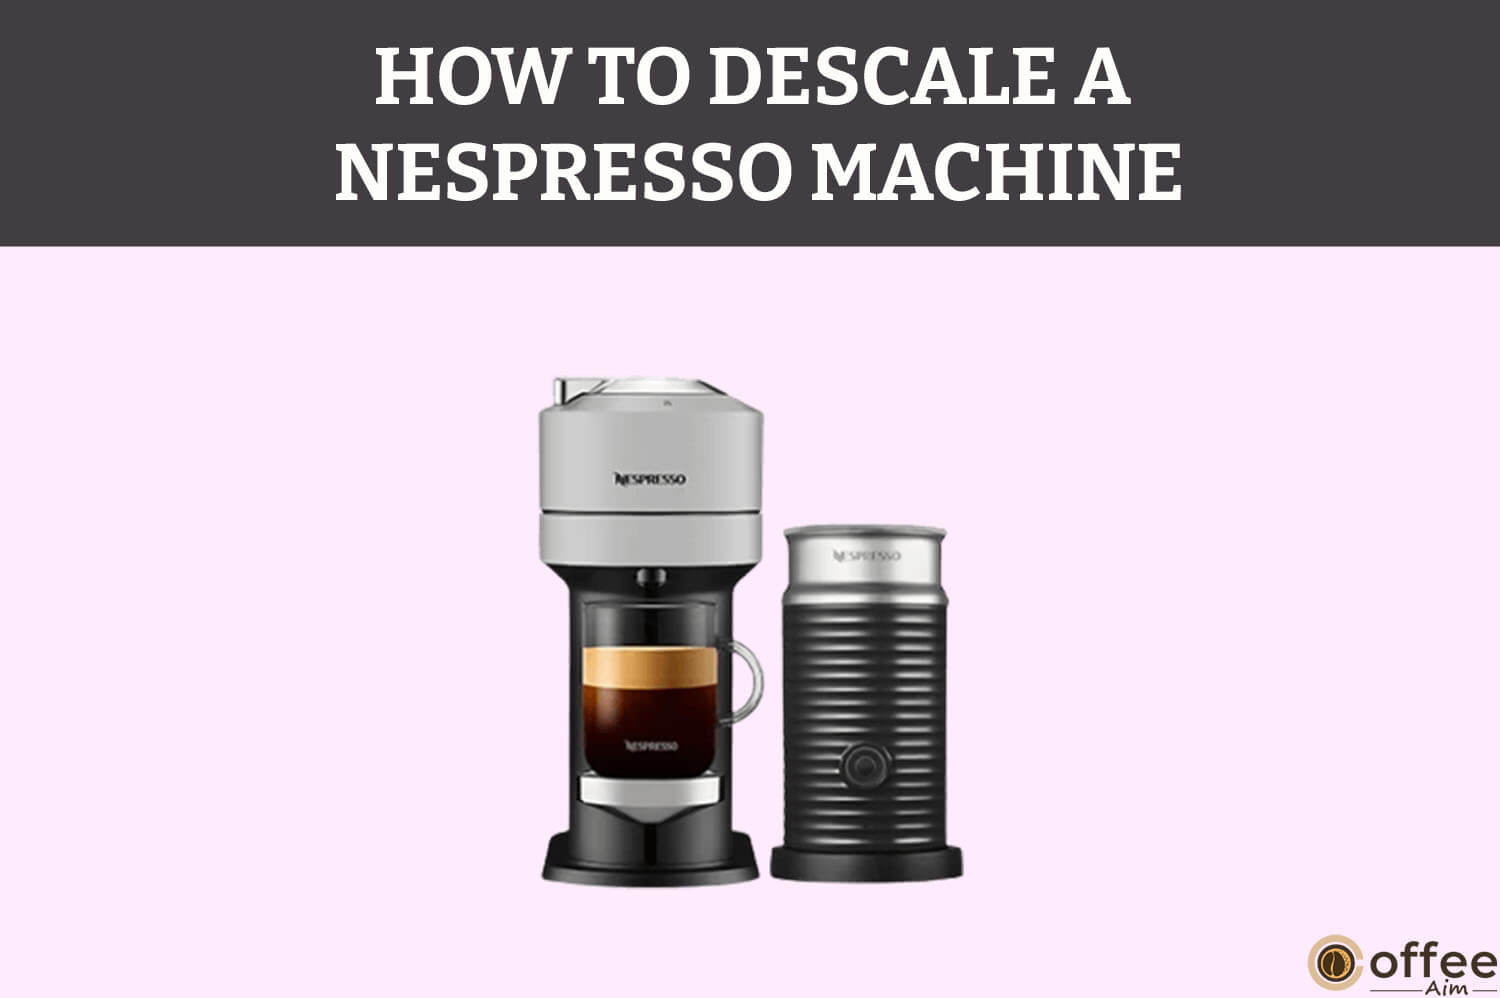 Featured image for the article "How To Descale A Nespresso Machine"